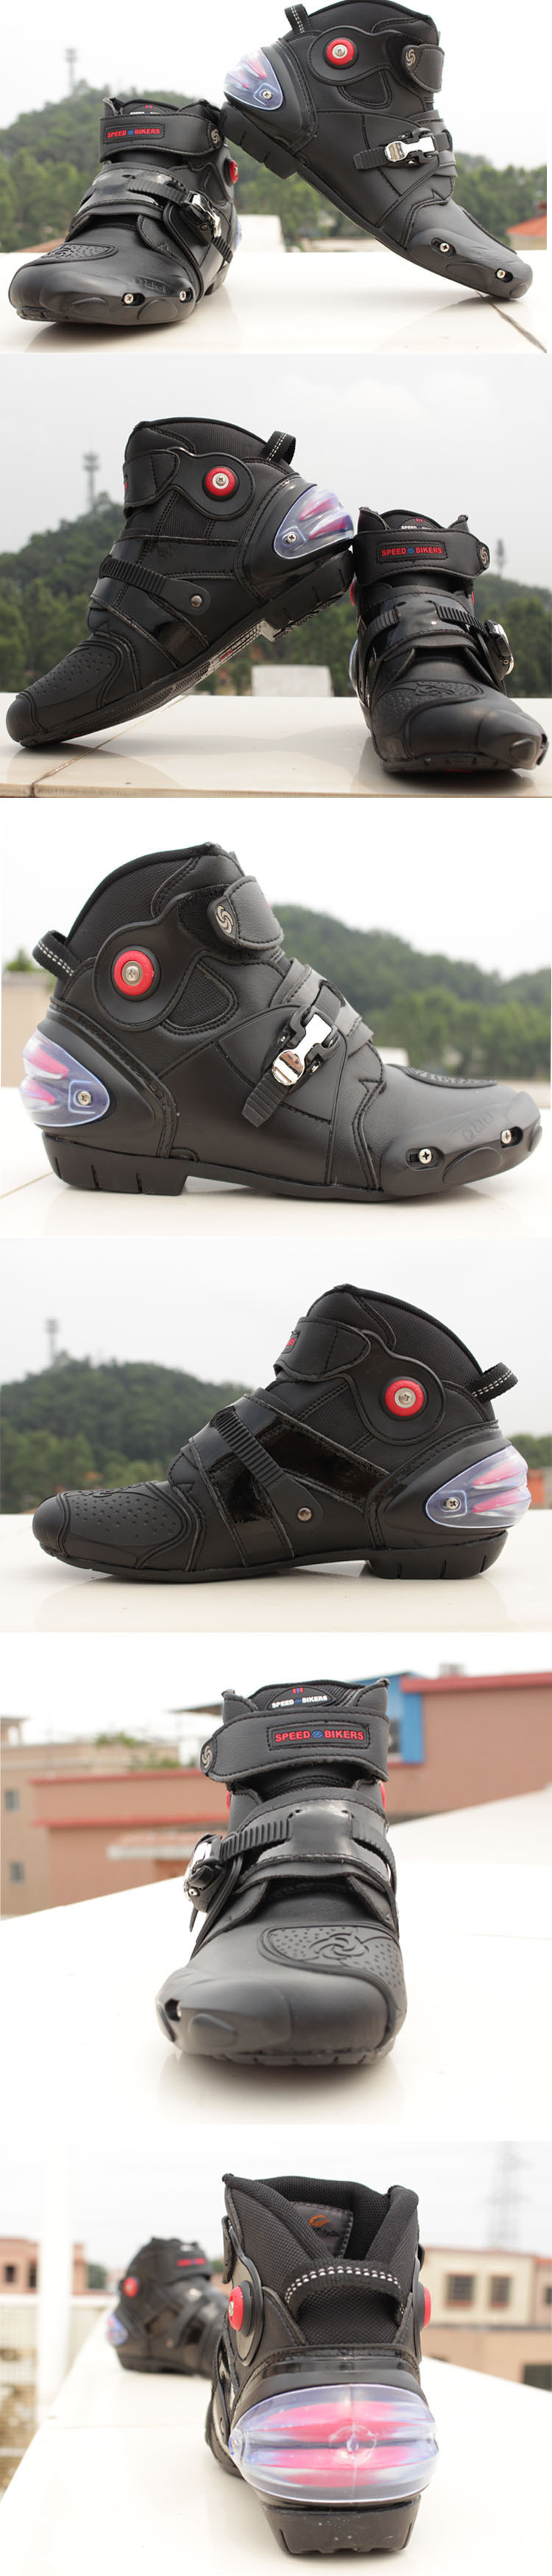 motorcycle shoes effective 